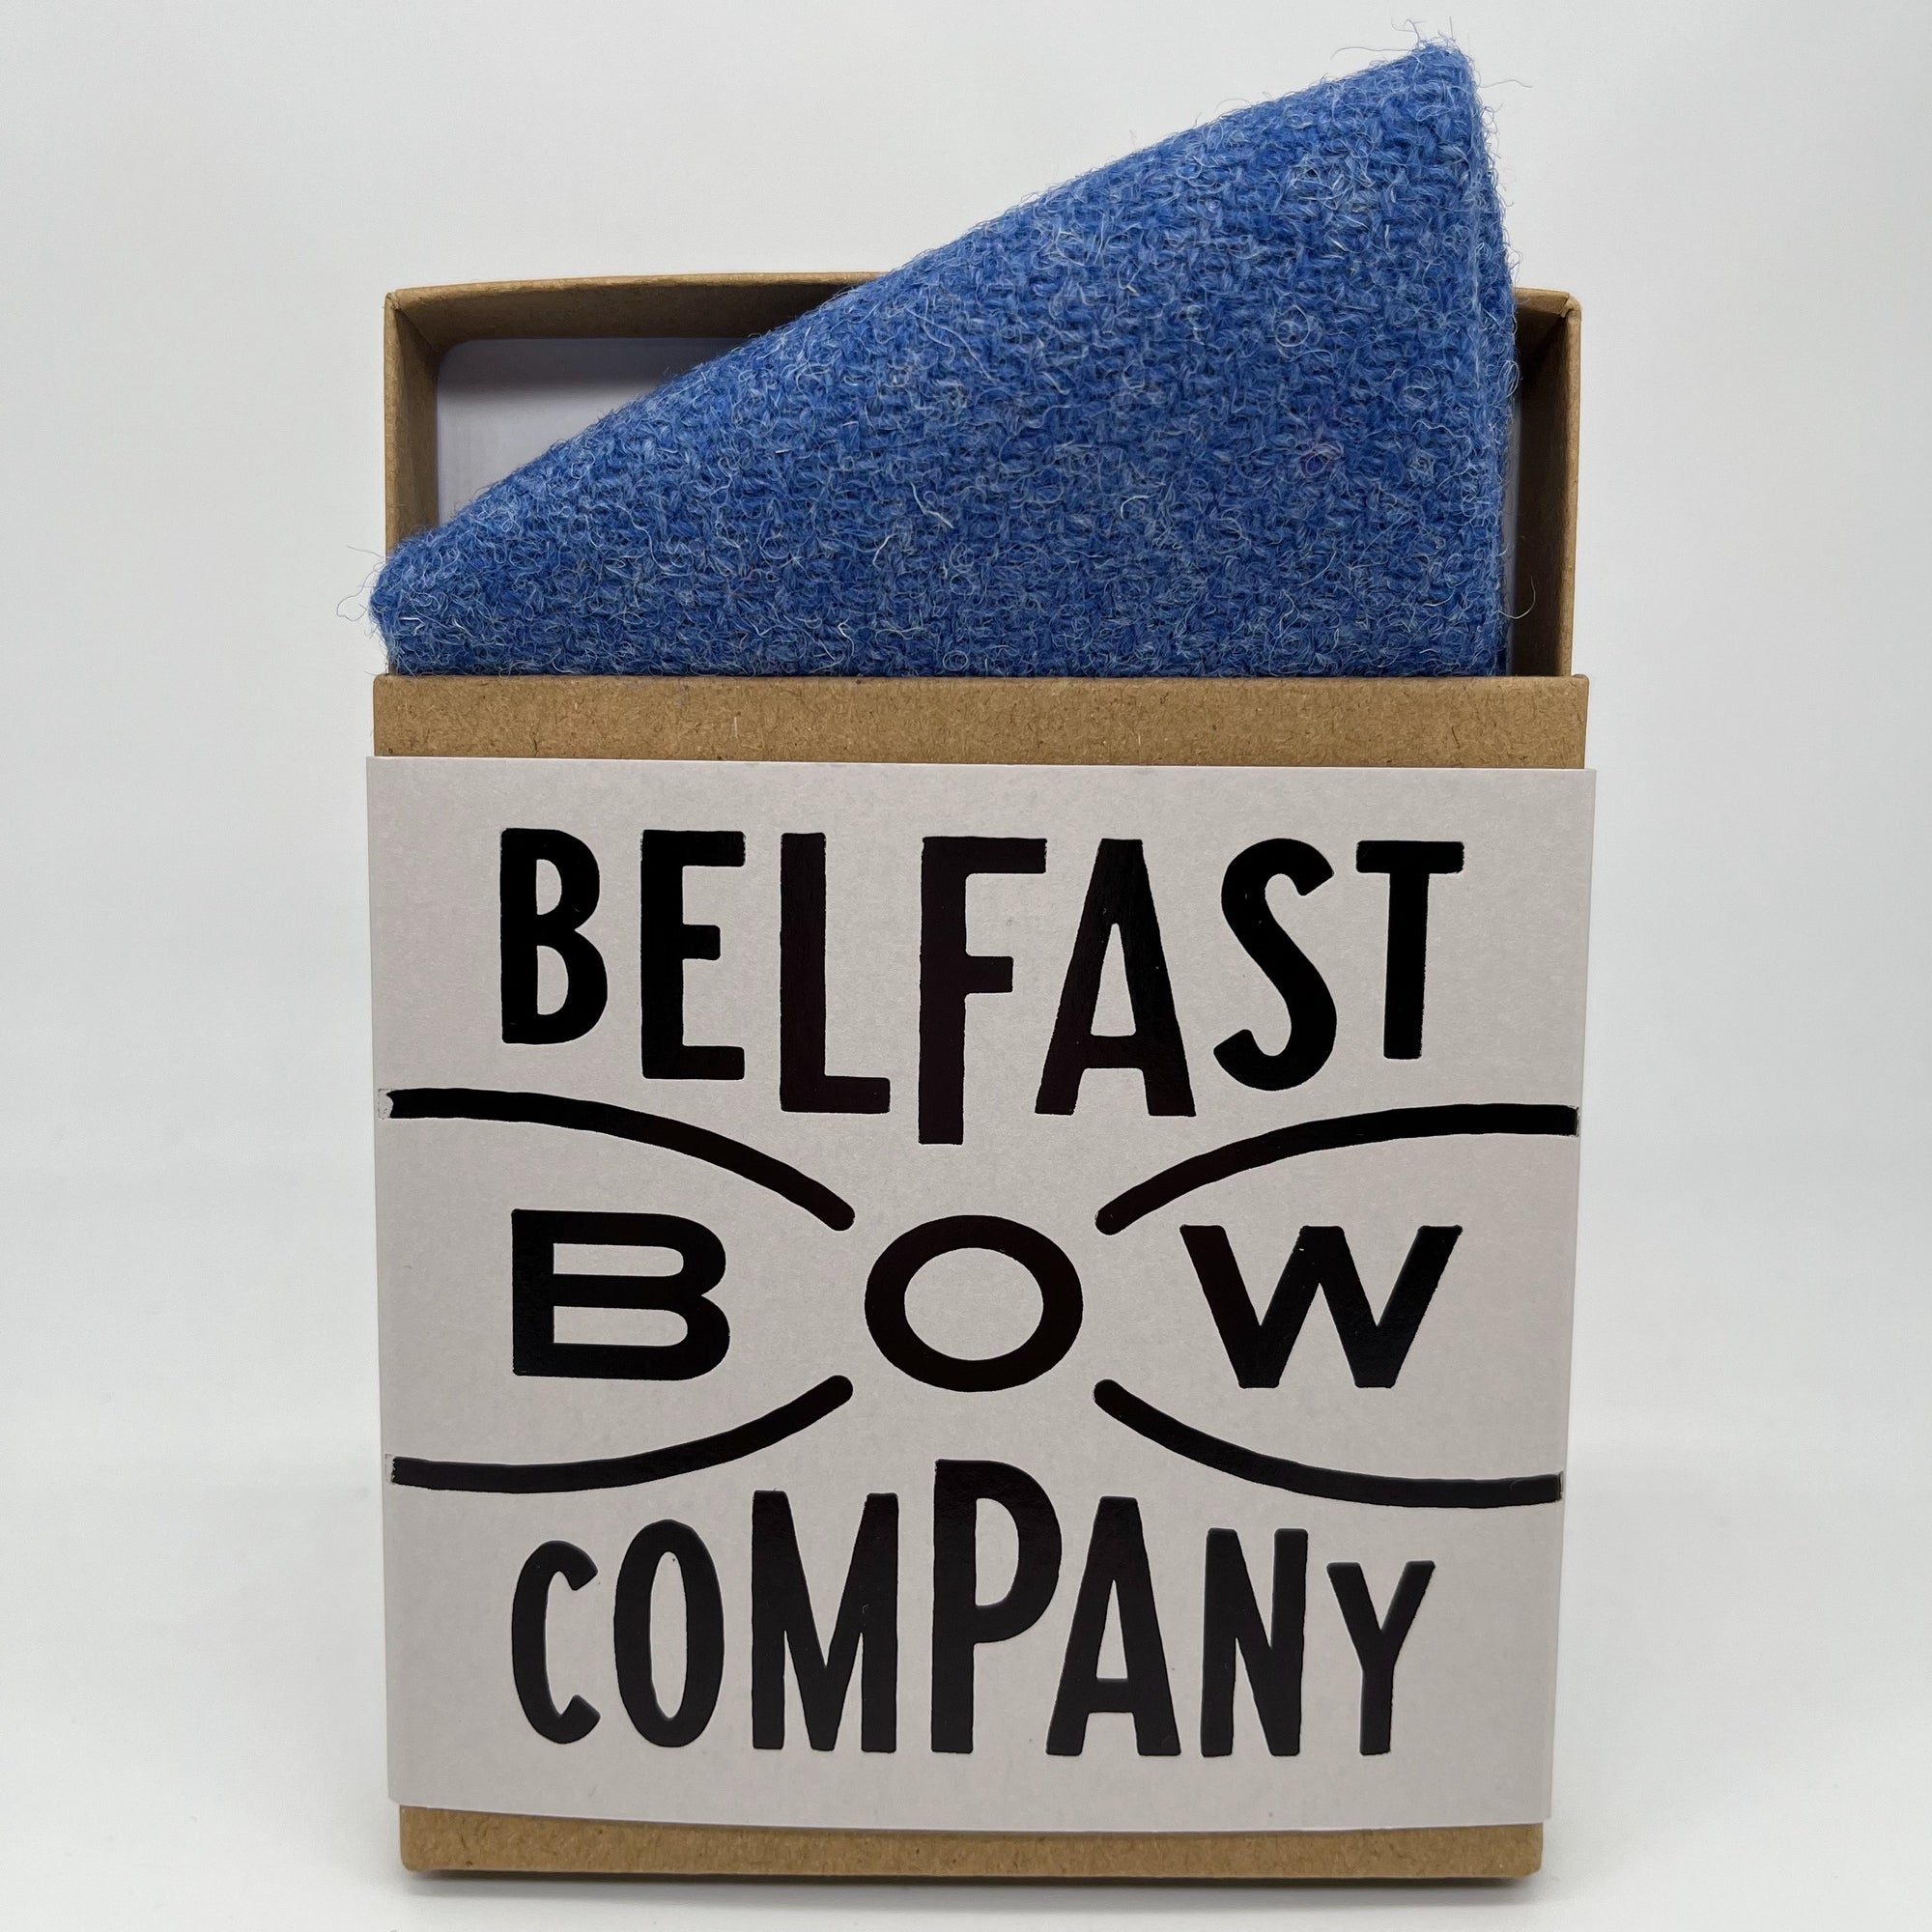 Harris Tweed Pocket Square in Blue by the Belfast Bow Company